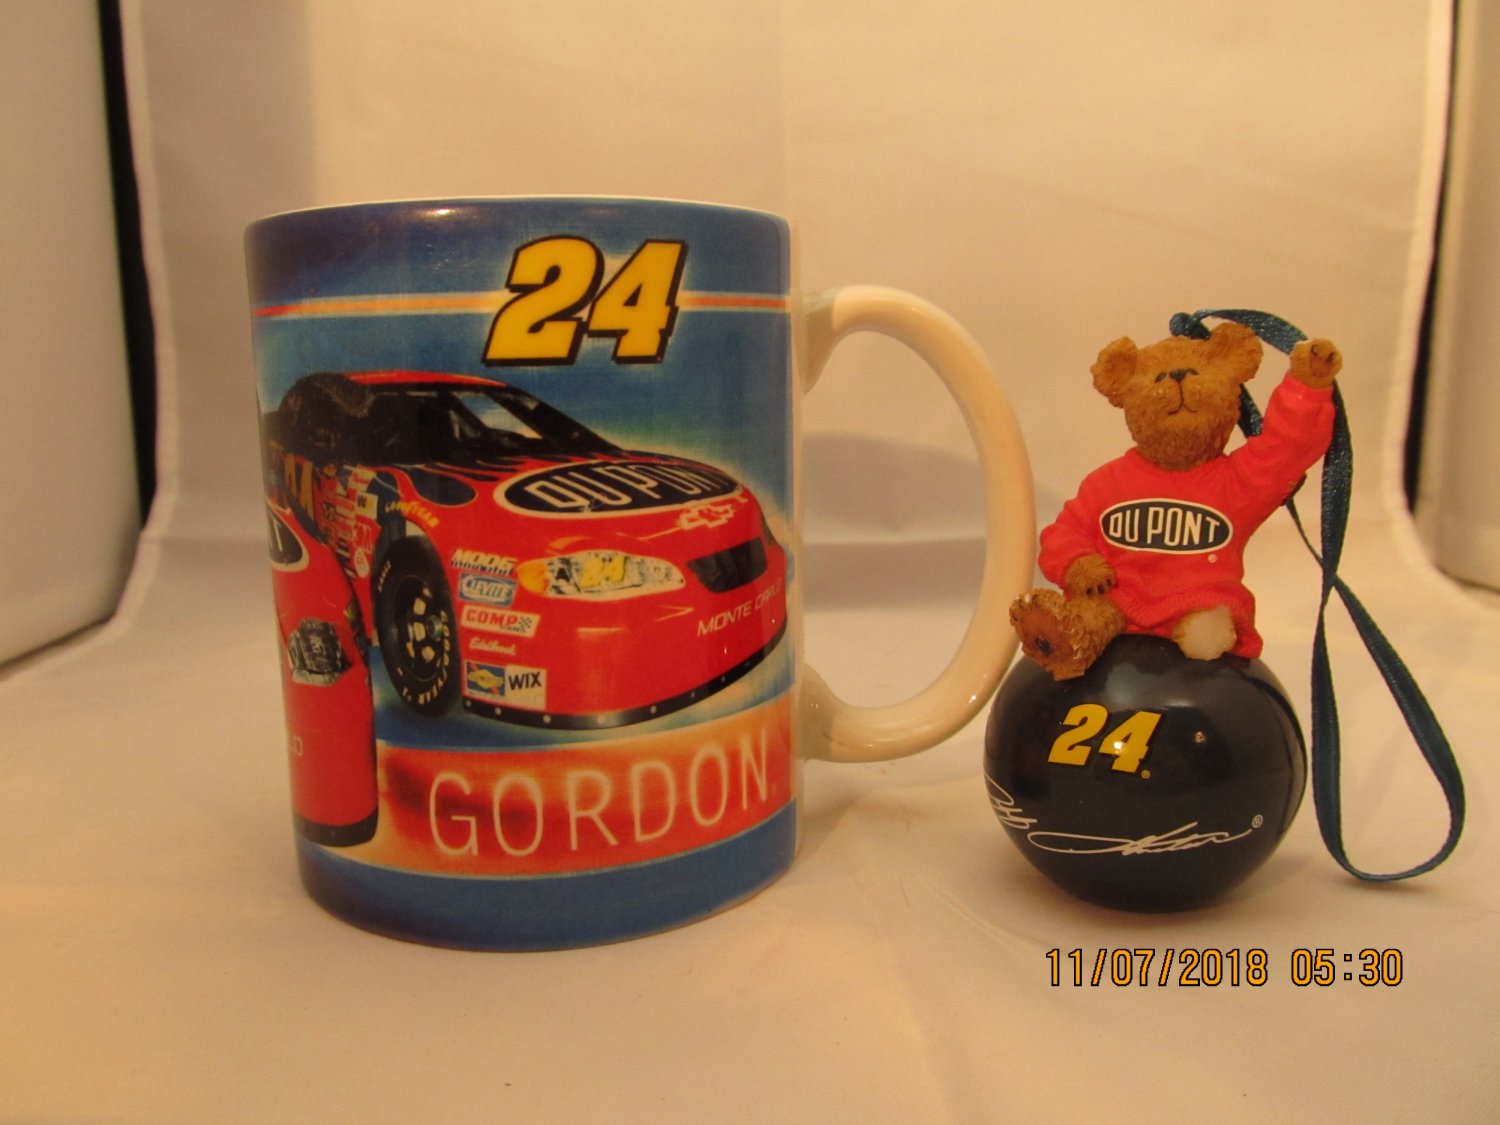 Lot of 2 Jeff Gordon #24 Dupont Coffee Cup and ornament